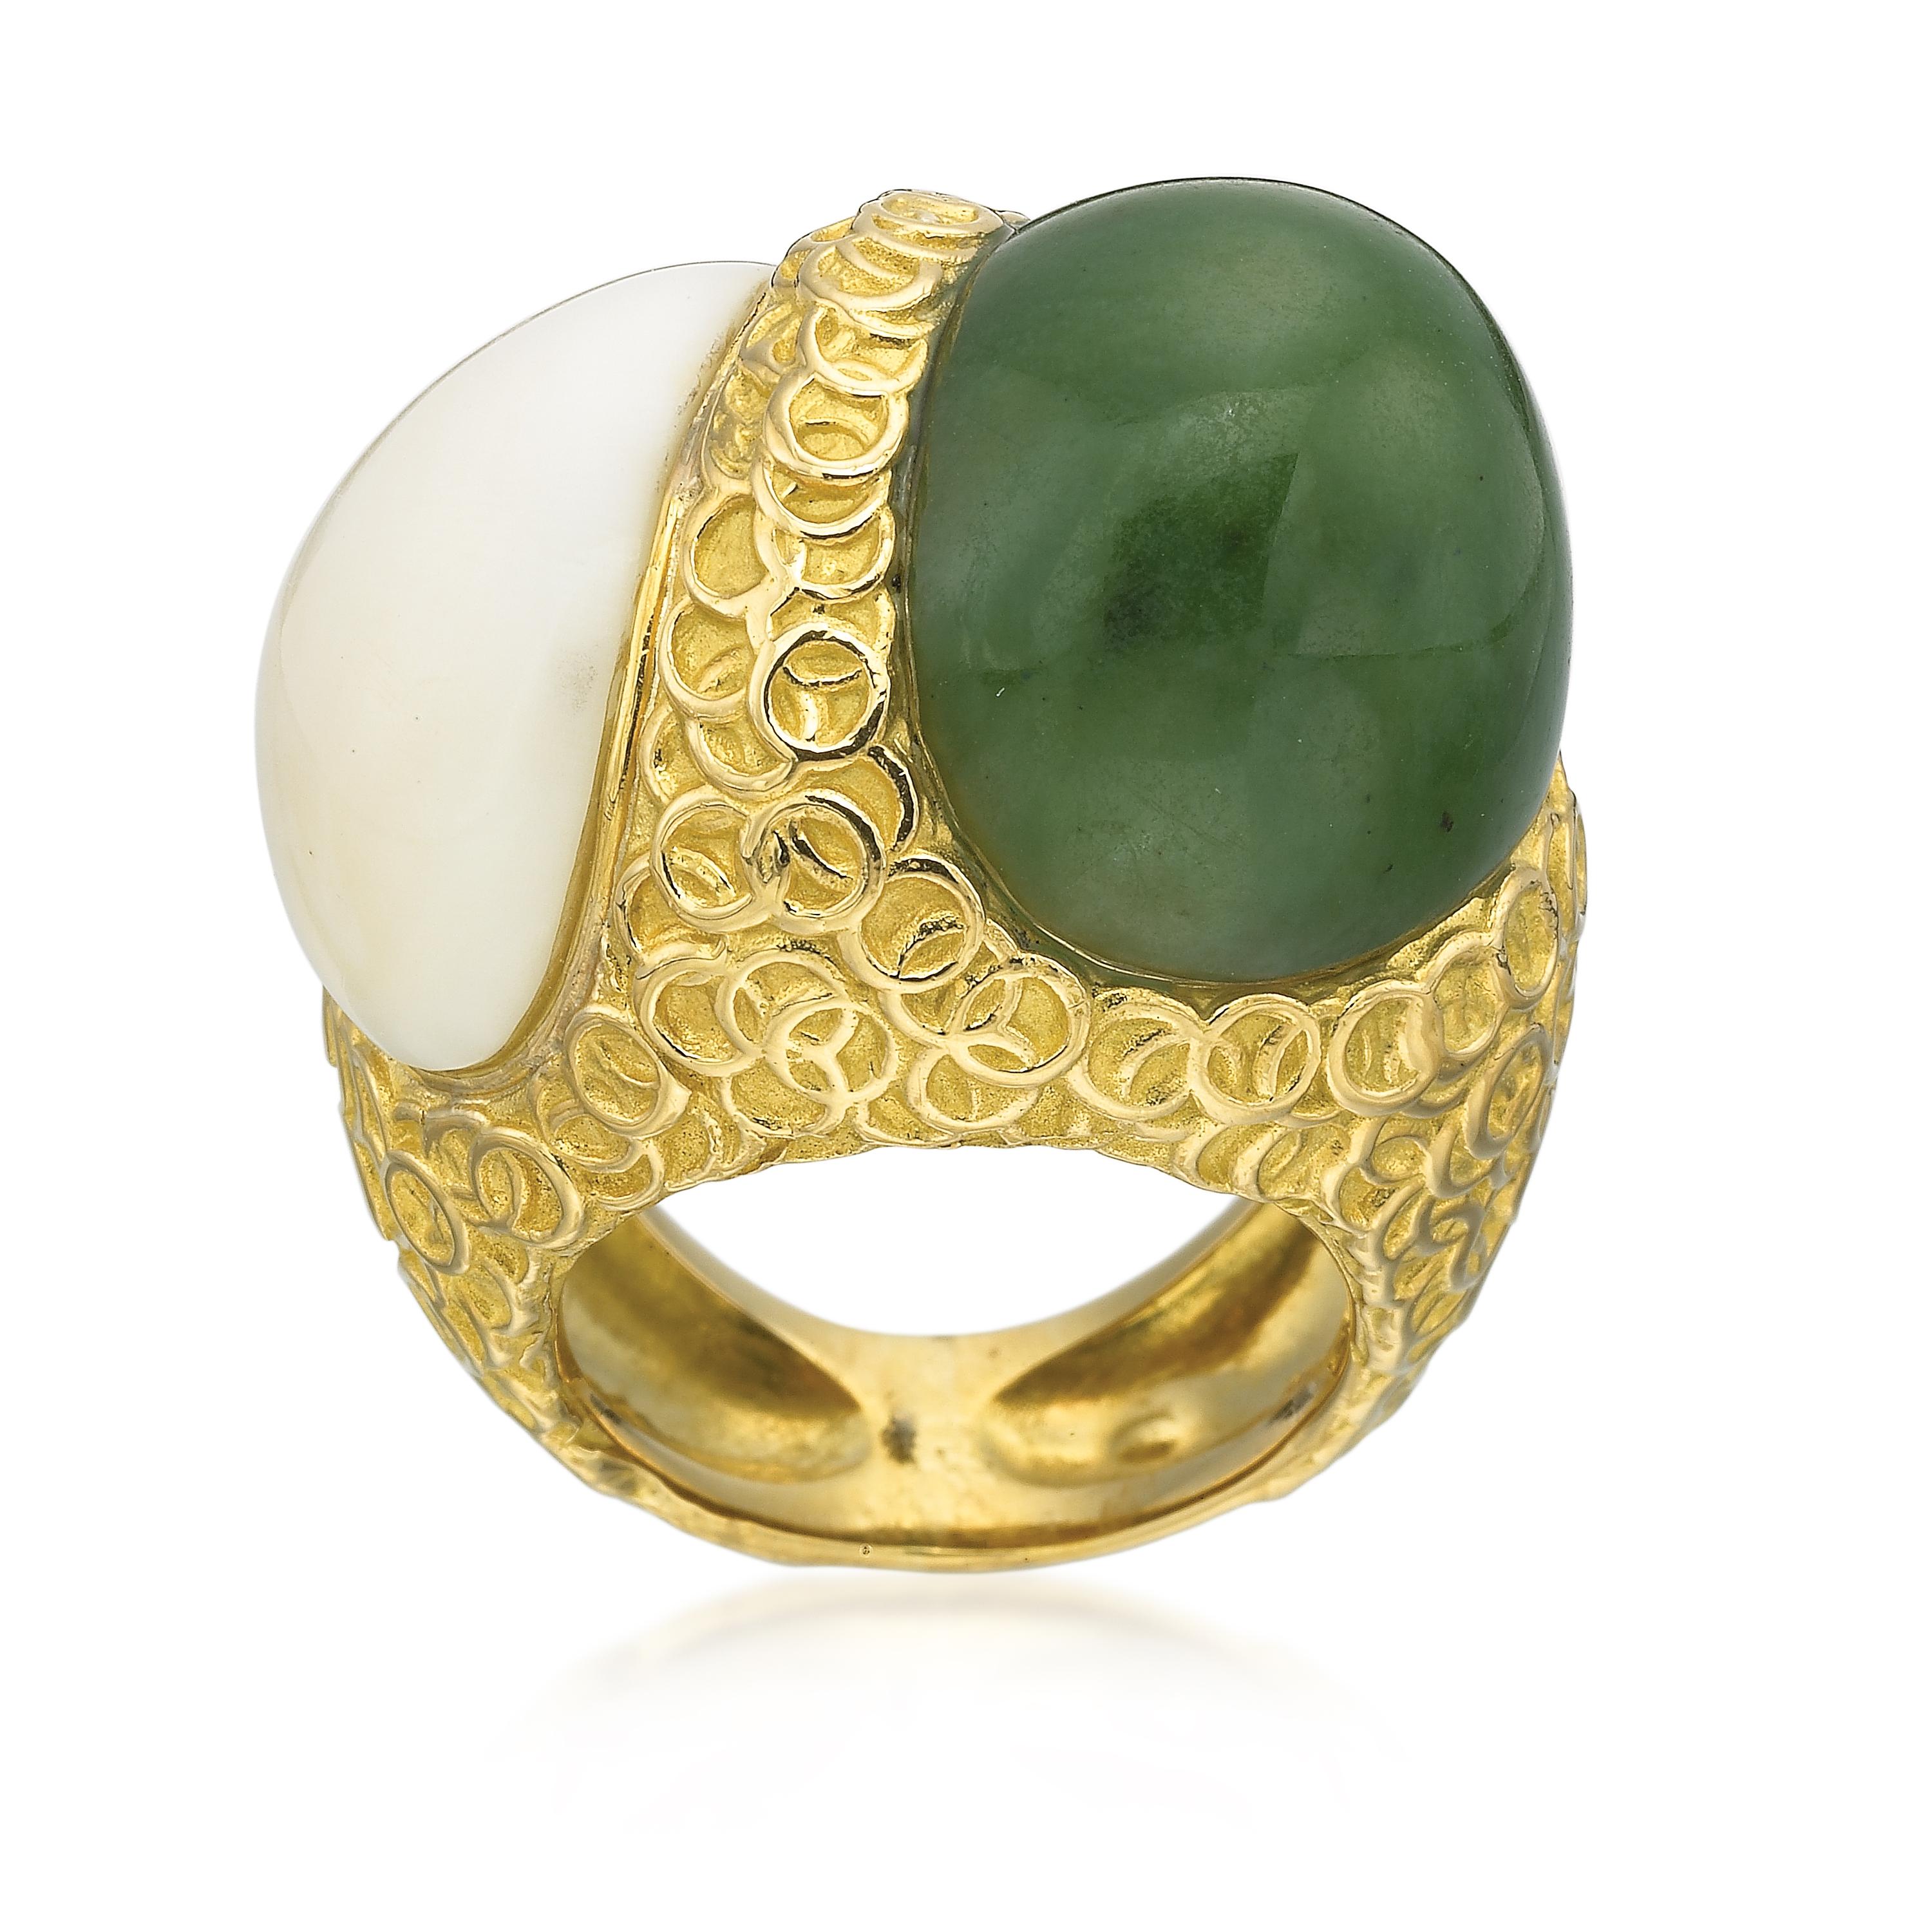 A modern late century (Circa 1980) 40.38 carat Green Nephrite Jade cabochon cut stone pairs nicely along with a 13.98 carat white cabochon cut jade stone. The circular design intertwining the two fabulous stones is 18K yellow gold. Ring comes in